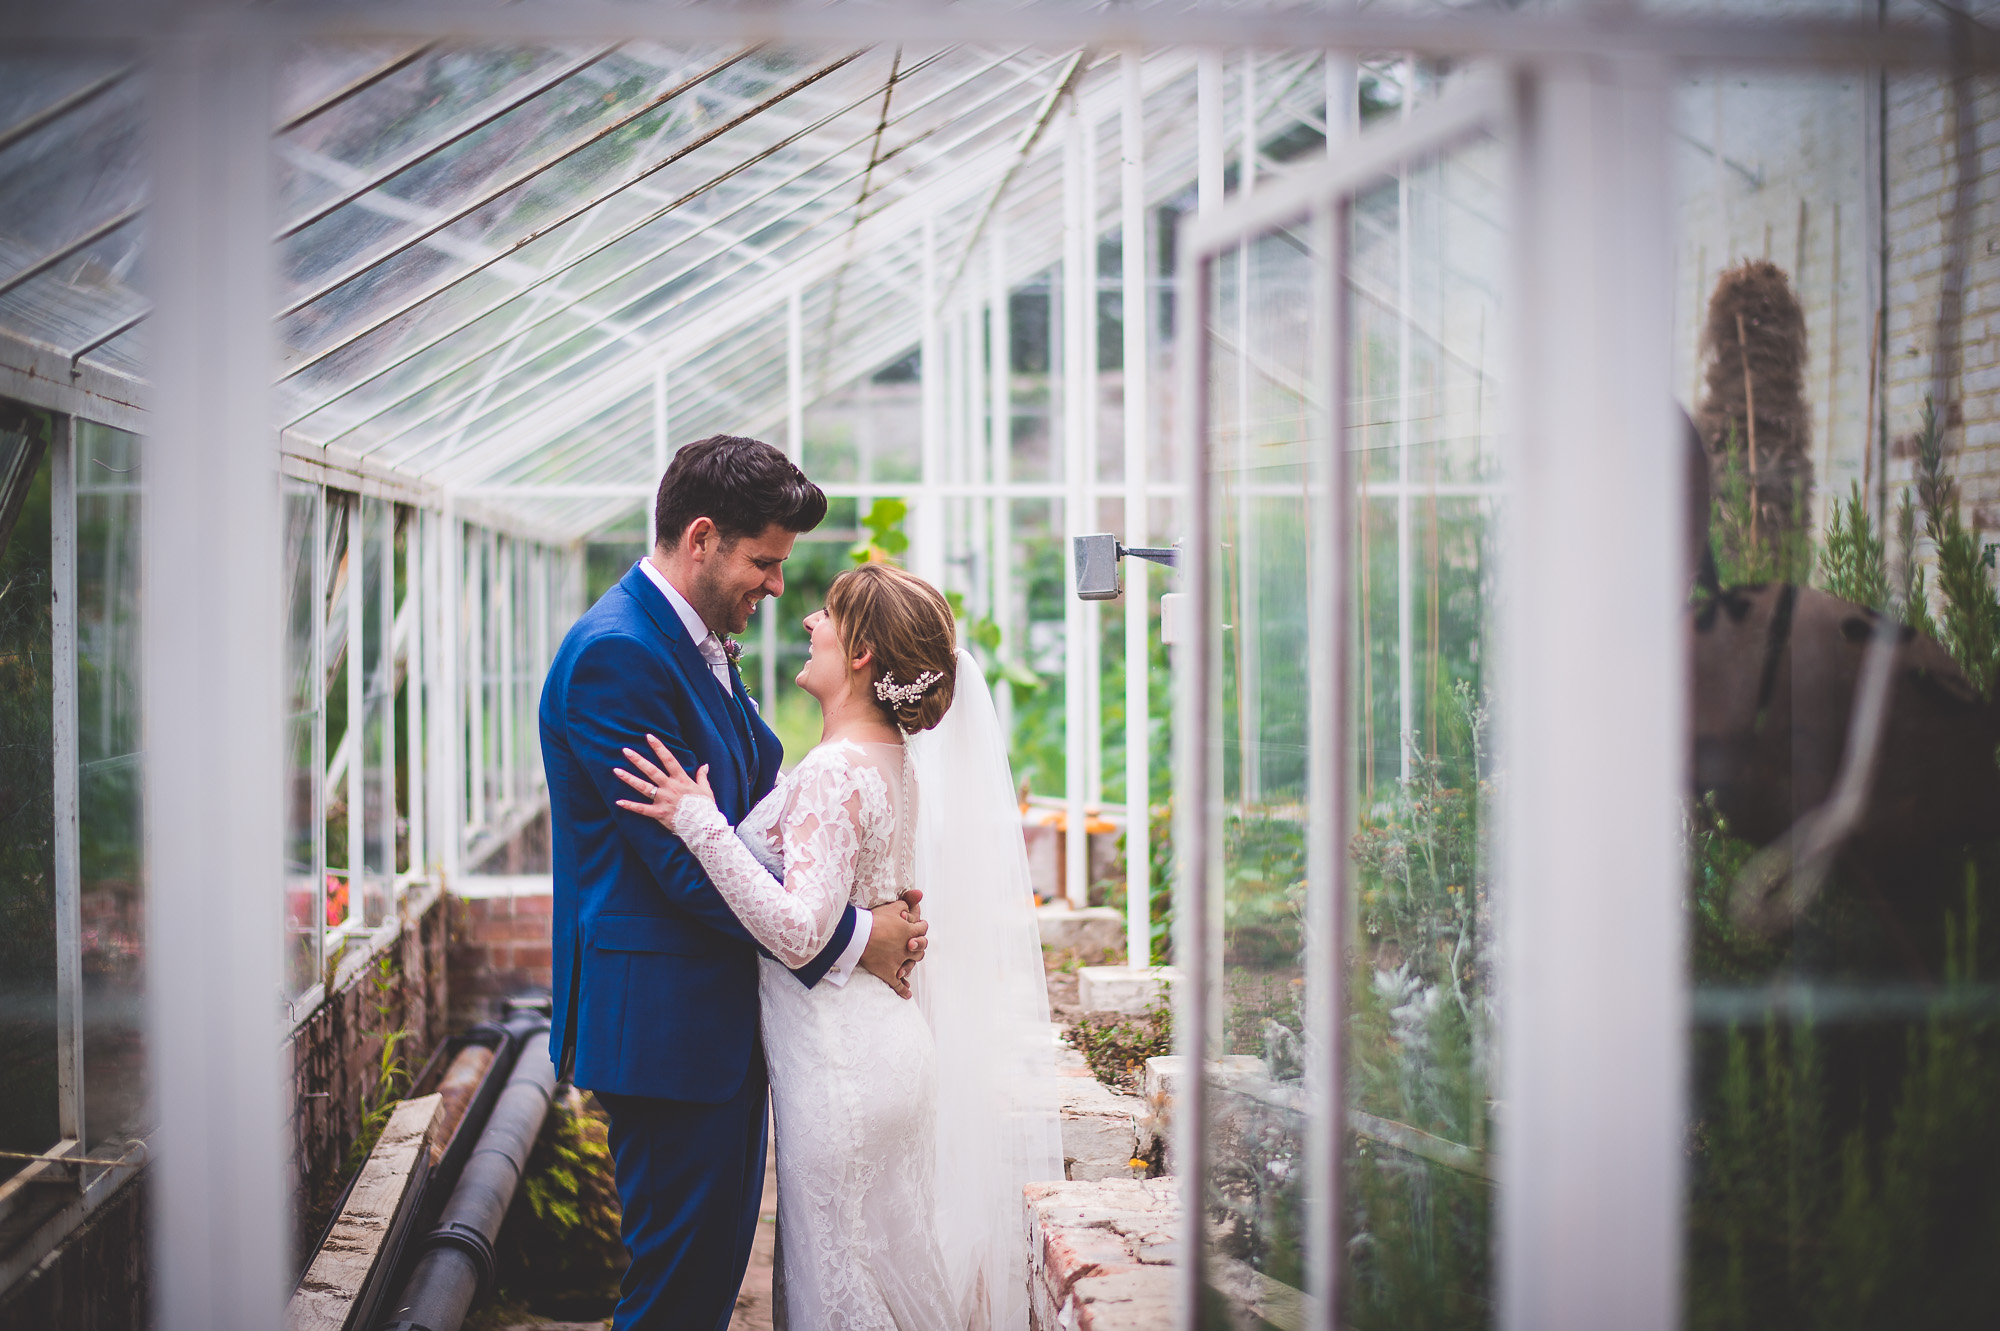 A wedding photographer capturing a groom embracing his bride in a greenhouse.